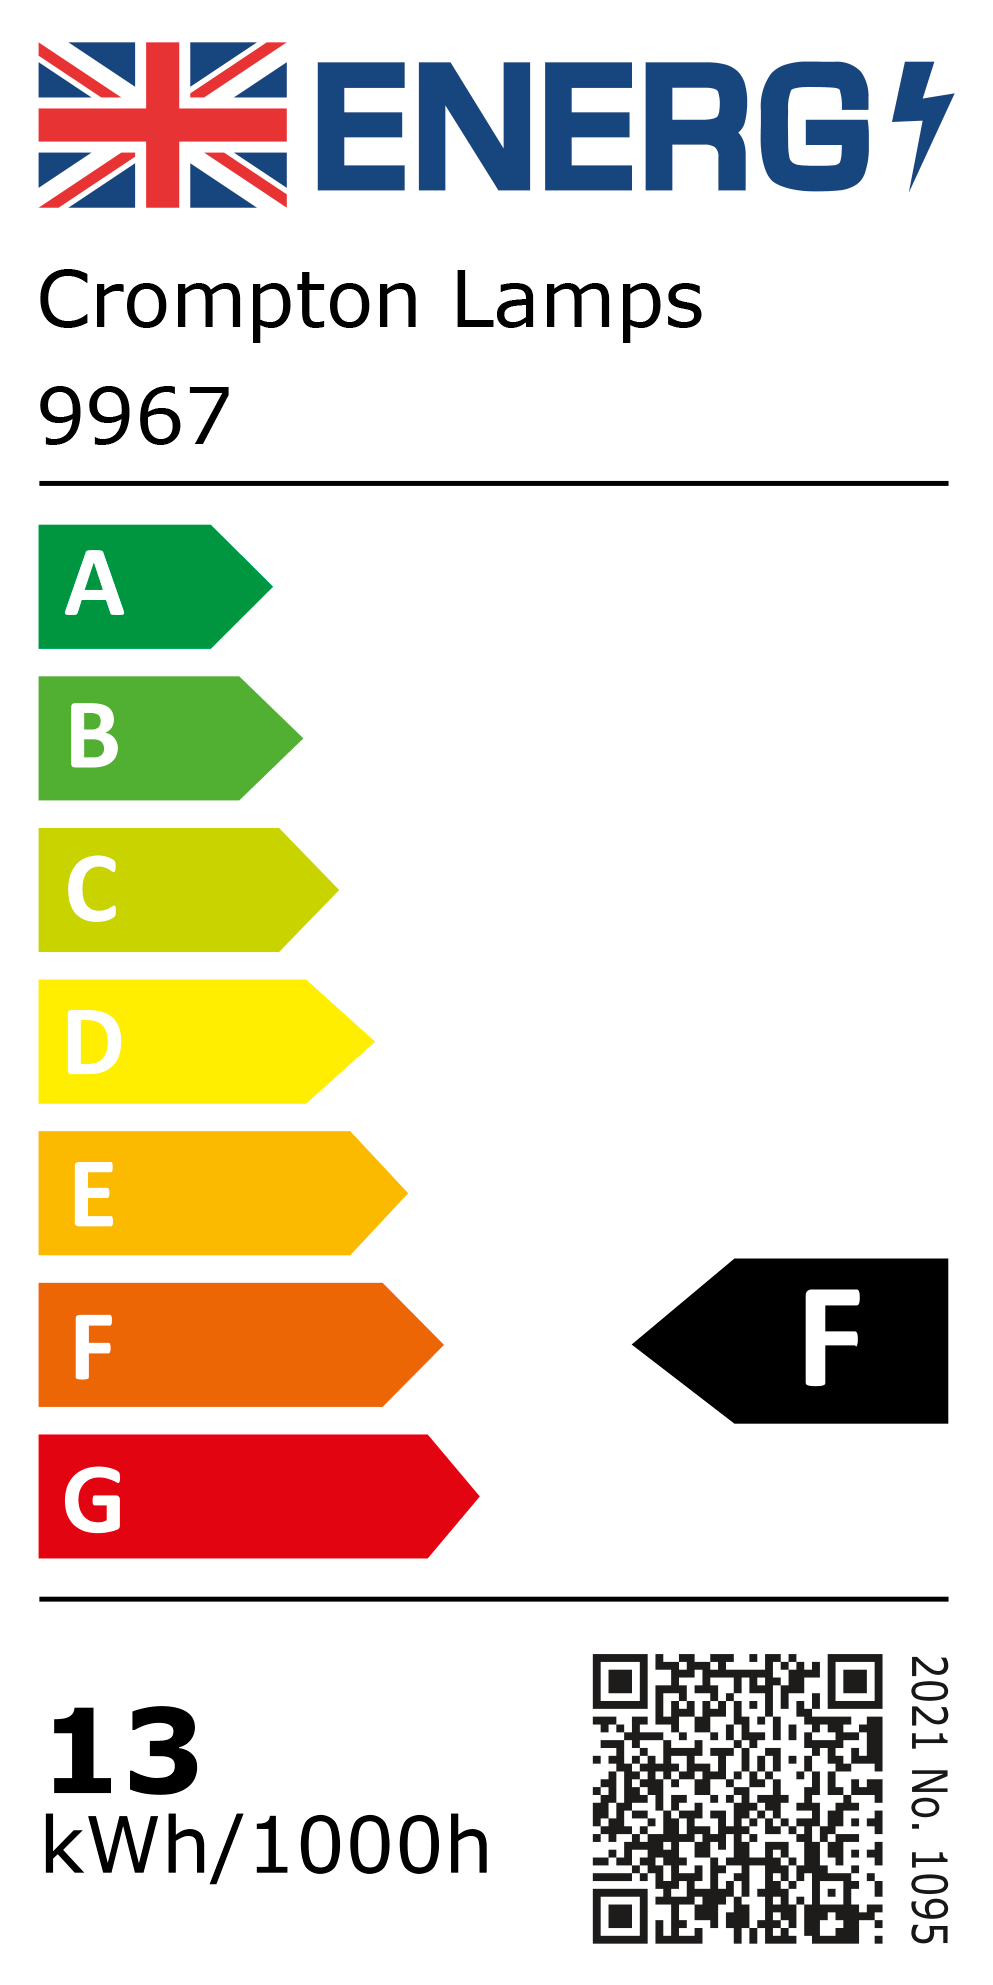 New 2021 Energy Rating Label: Stock Code 9967